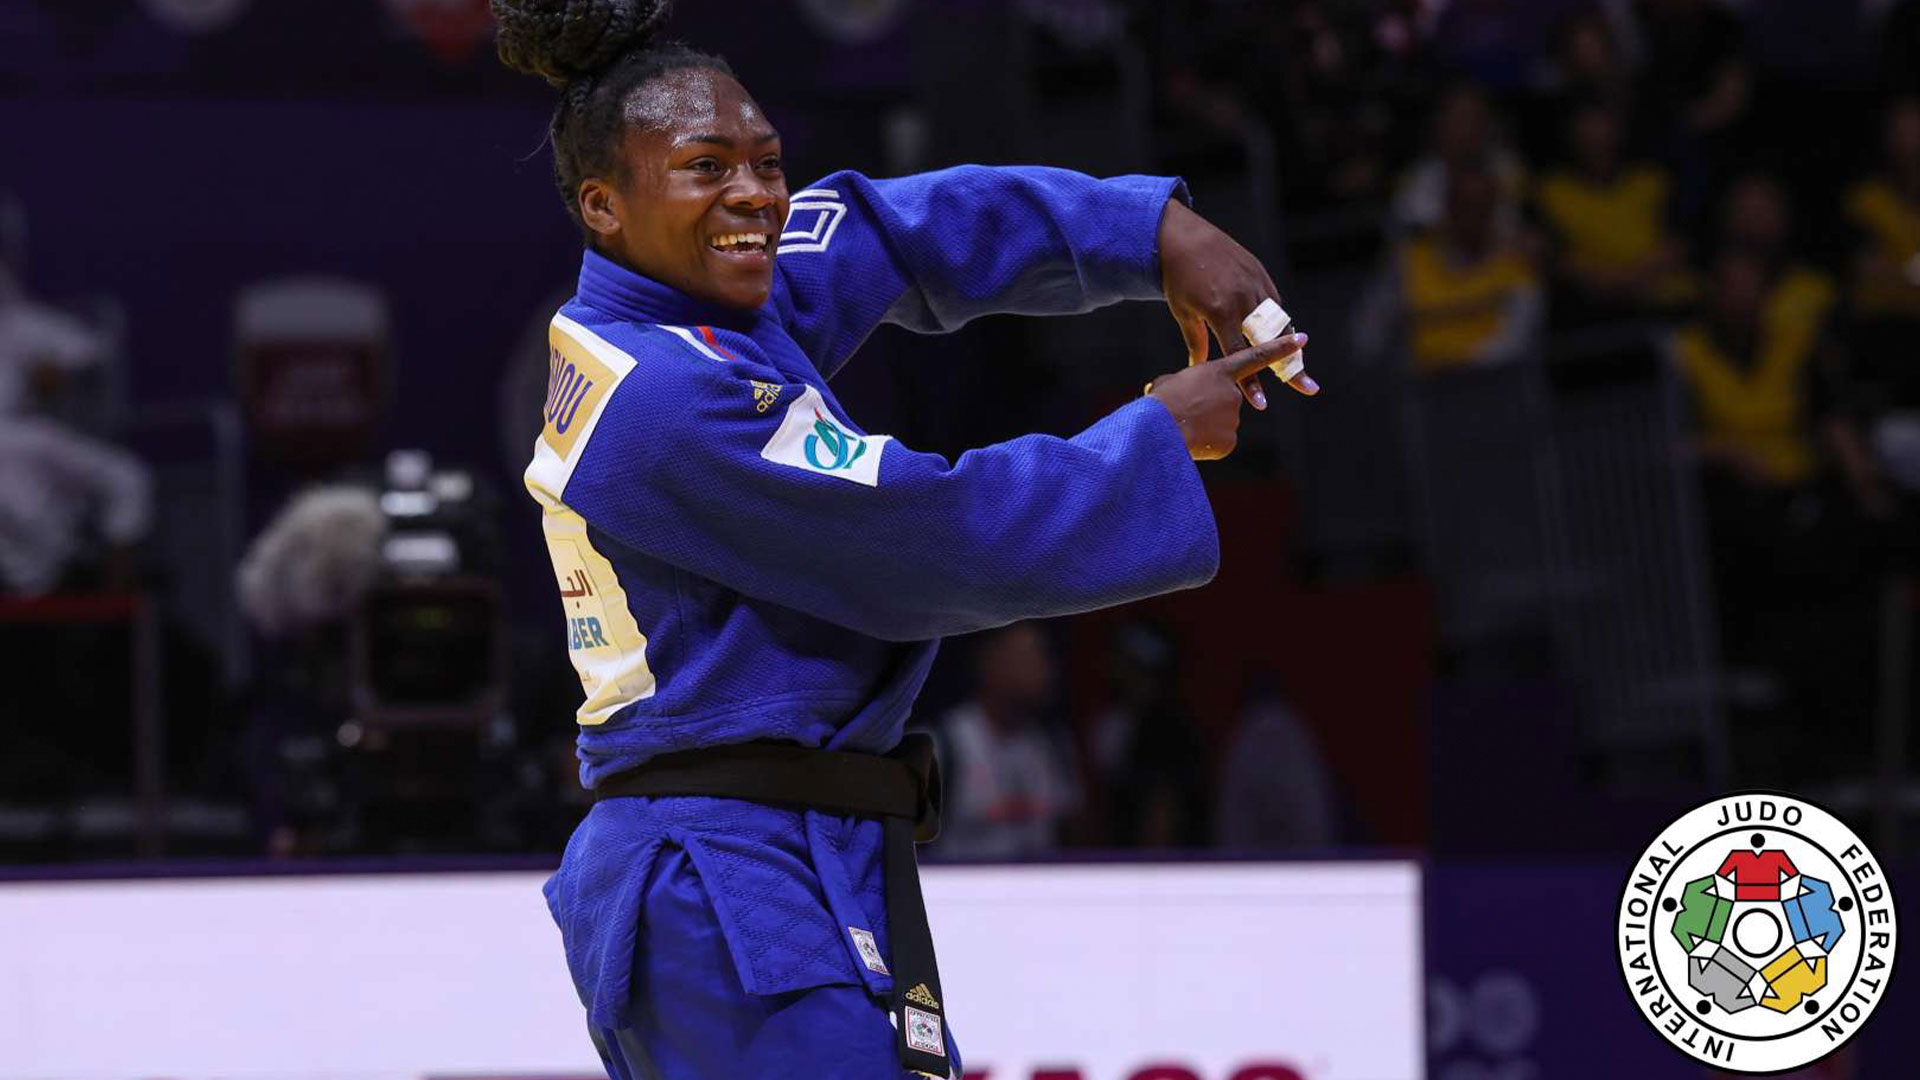 World Judo Championship: Agbegnenou, Riner and the Abe siblings, owners of glory and epic